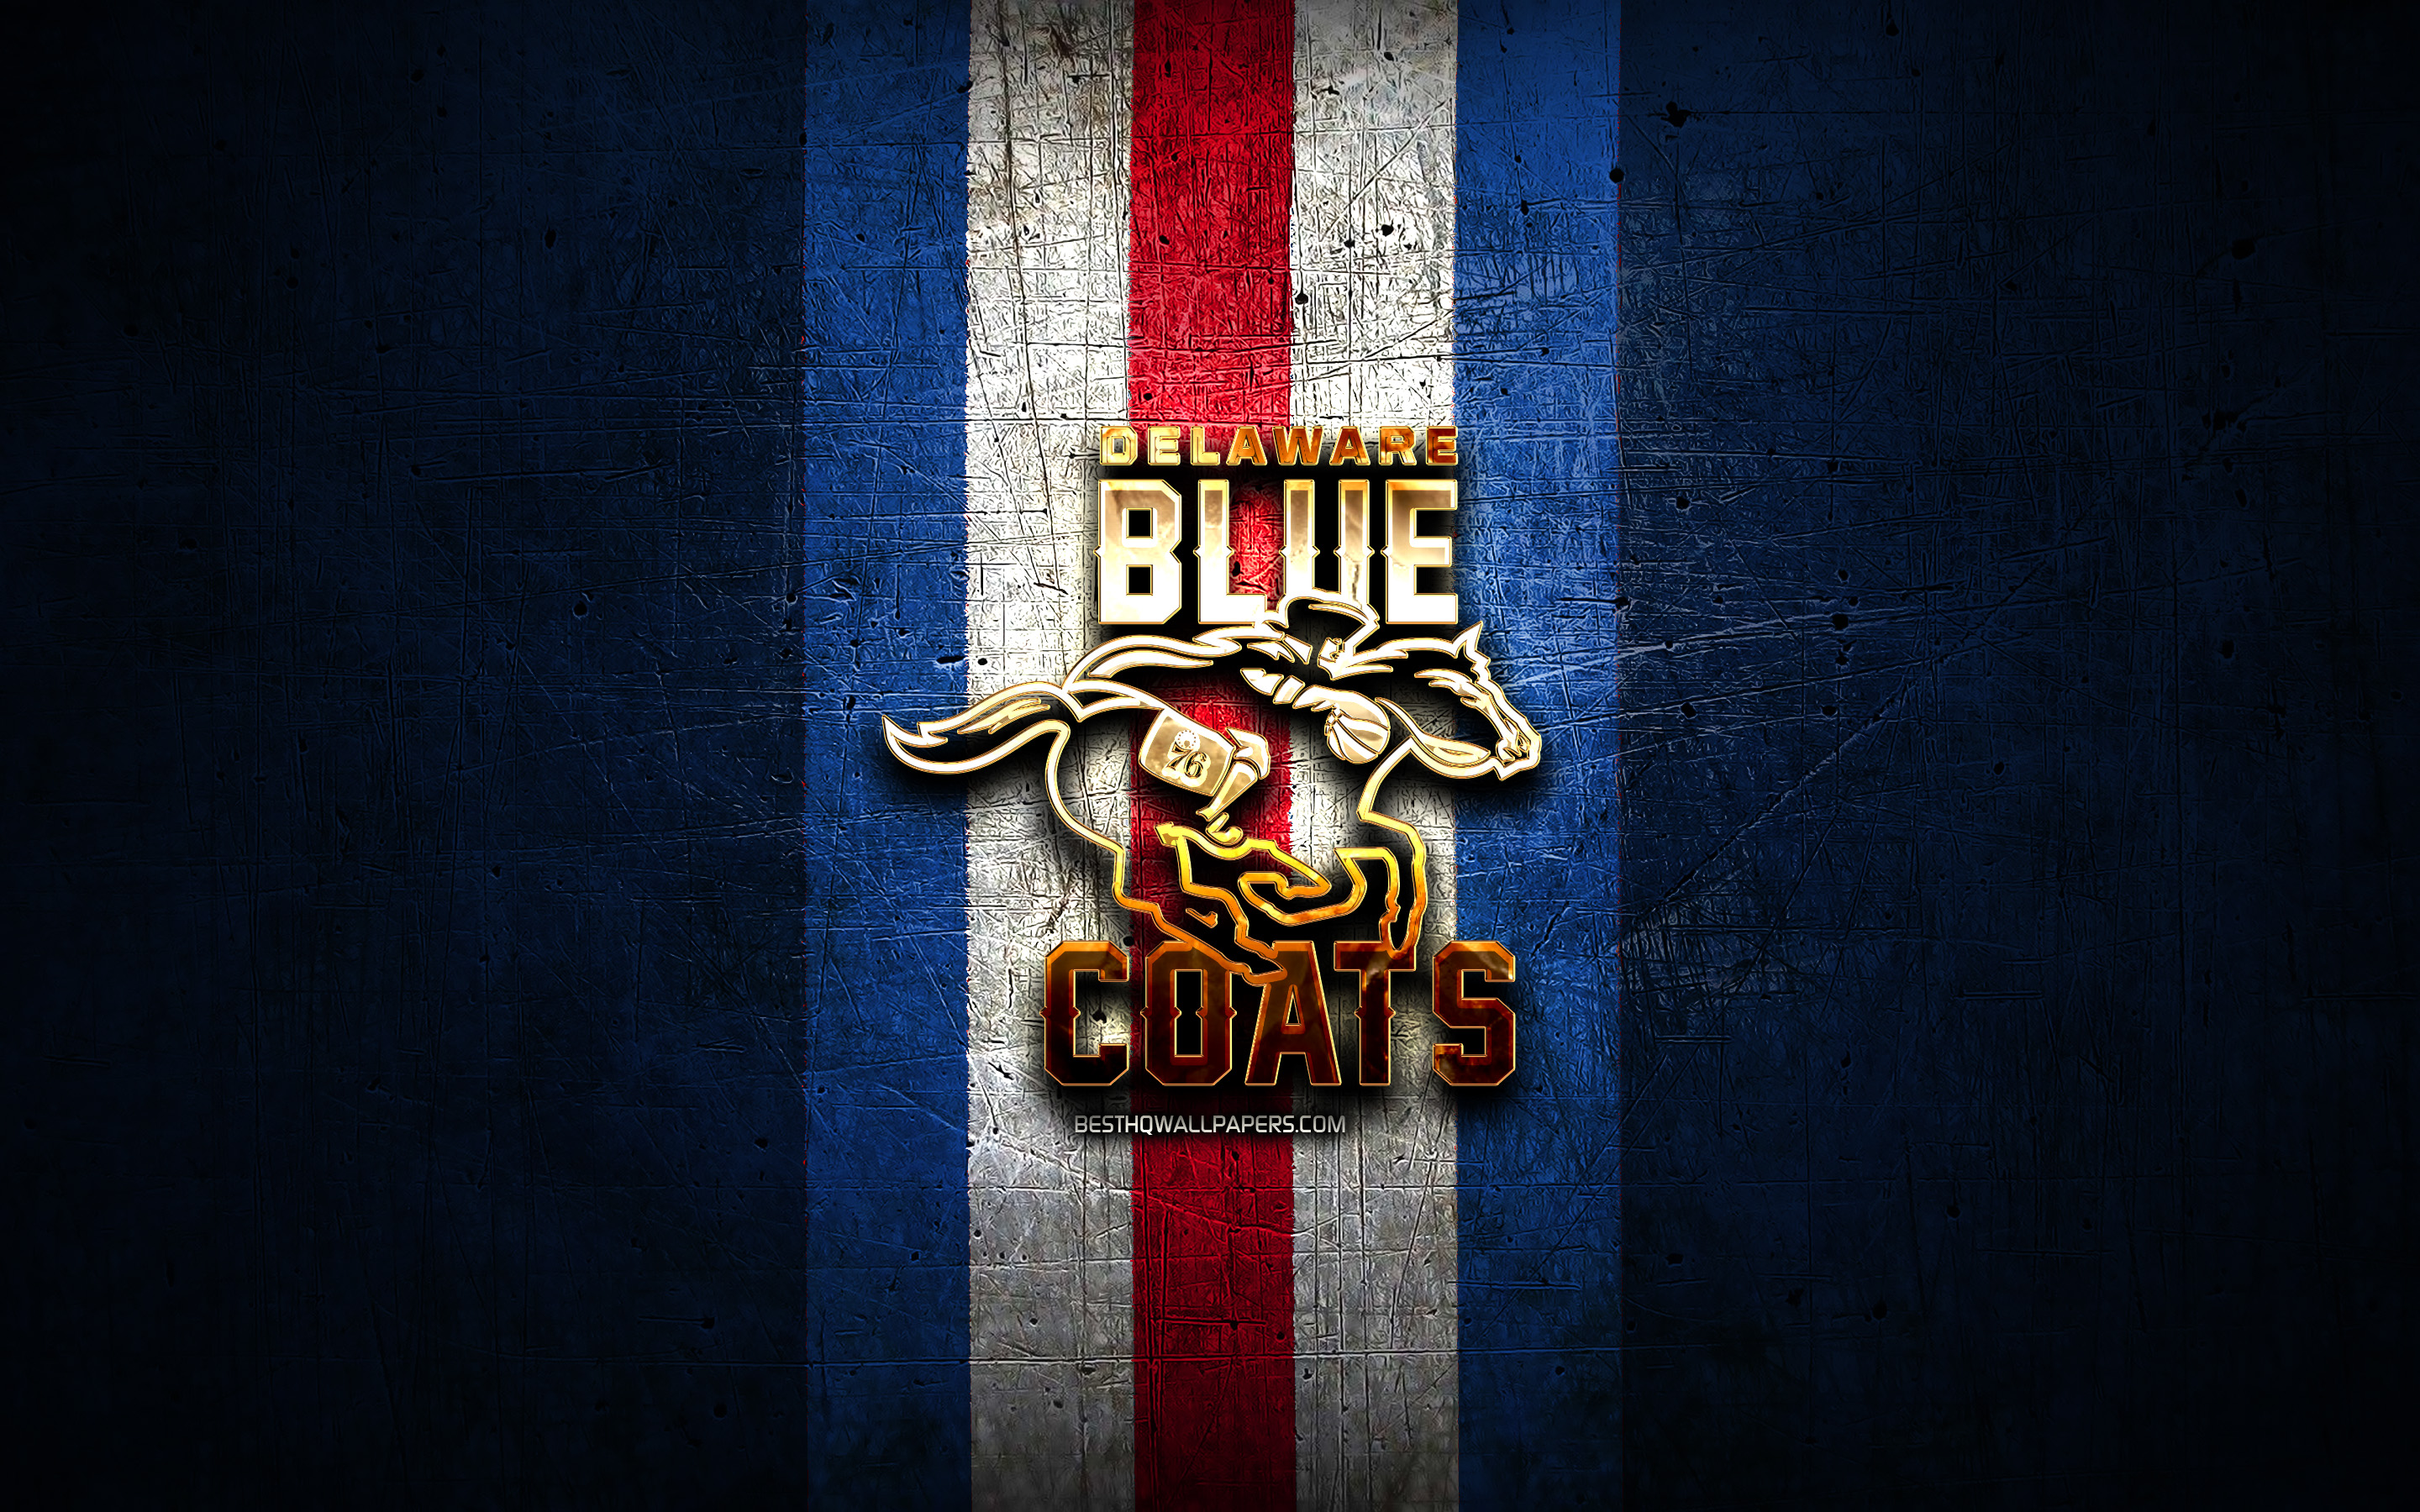 Download wallpapers delaware blue coats golden logo nba g league blue metal background american basketball team delaware blue coats logo basketball usa for desktop with resolution x high quality hd pictures wallpapers